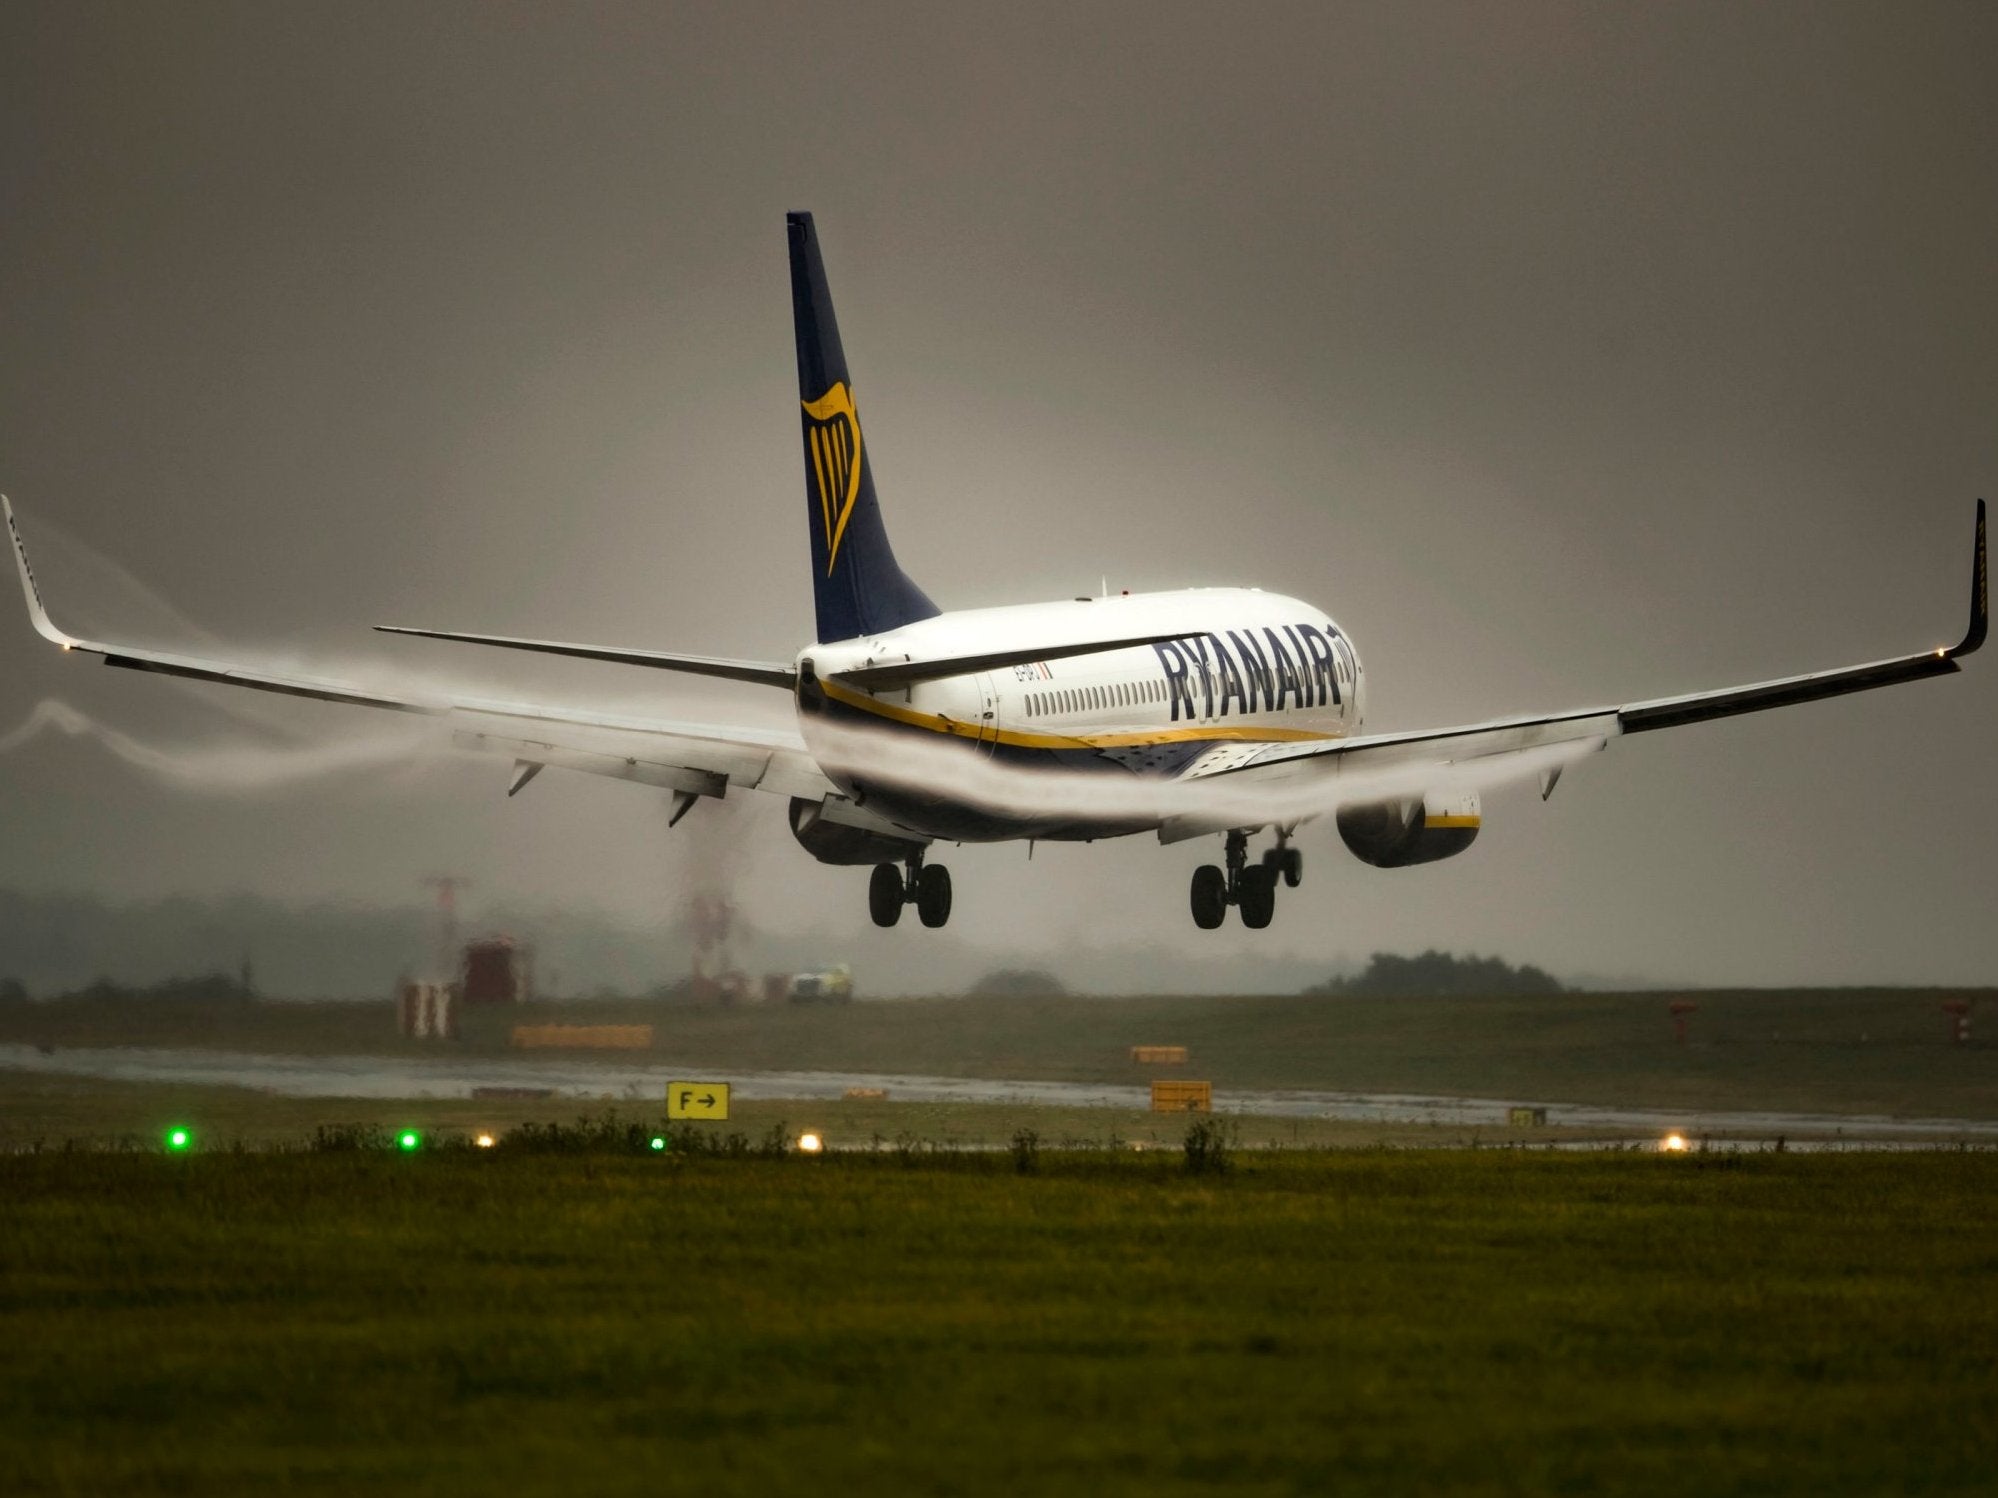 Flight news: Ryanair has sent out messages to thousands of passengers whose flights have been cancelled because of pilots' strikes